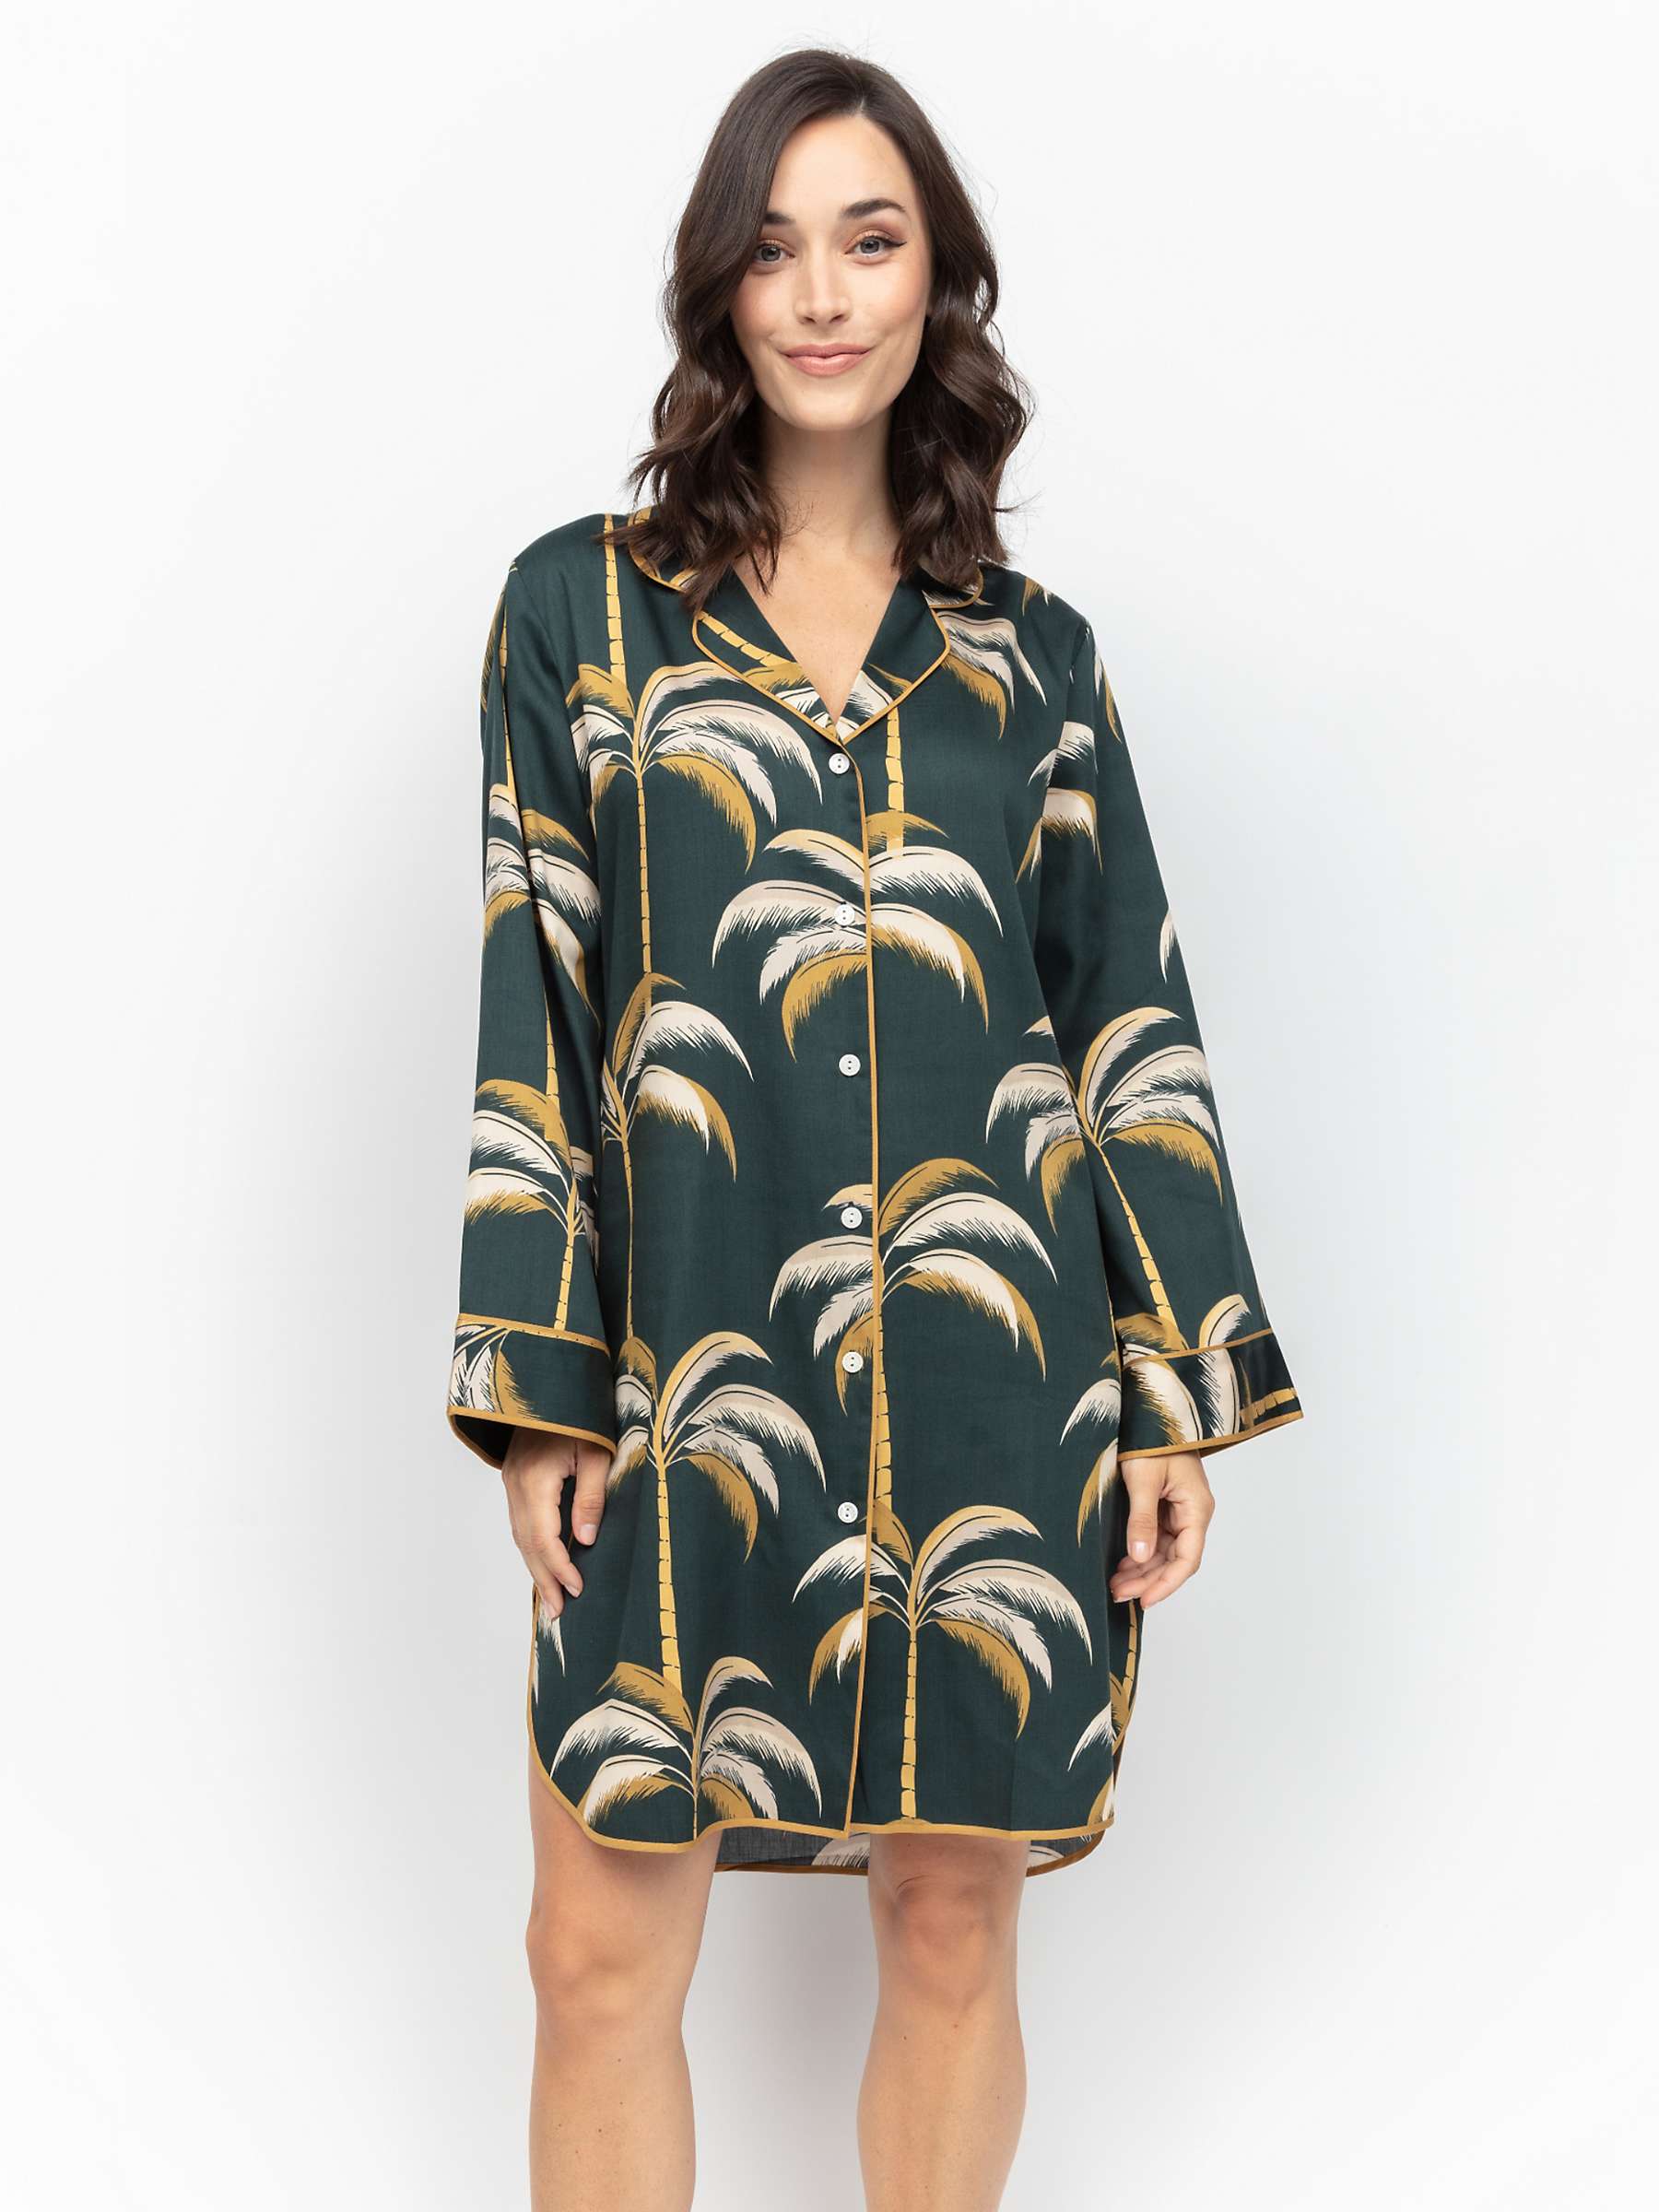 Buy Fable & Eve Pimlico Palm Print Nightshirt, Emerald Green Online at johnlewis.com